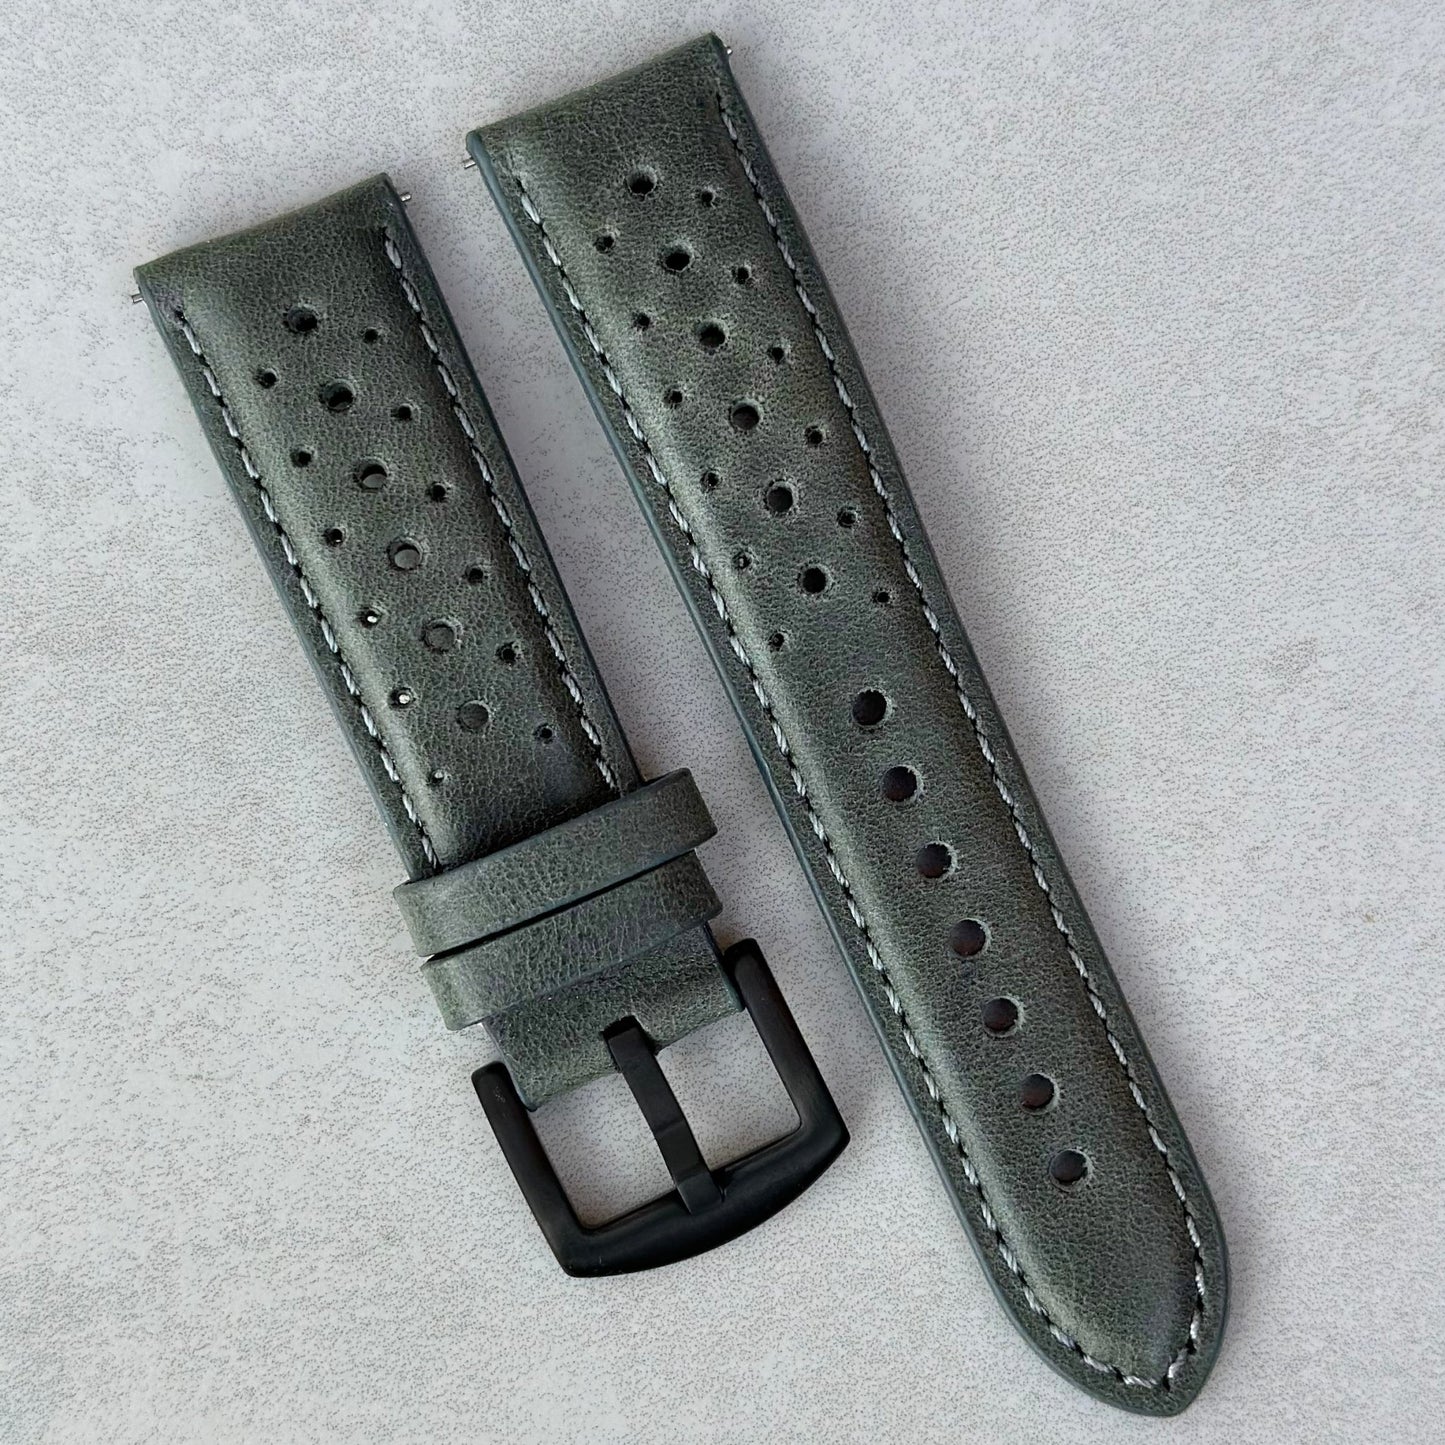 Montecarlo grey full grain leather watch strap with PVD black buckle. 18mm, 20mm, 22mm, 24mm. Watch And Strap.